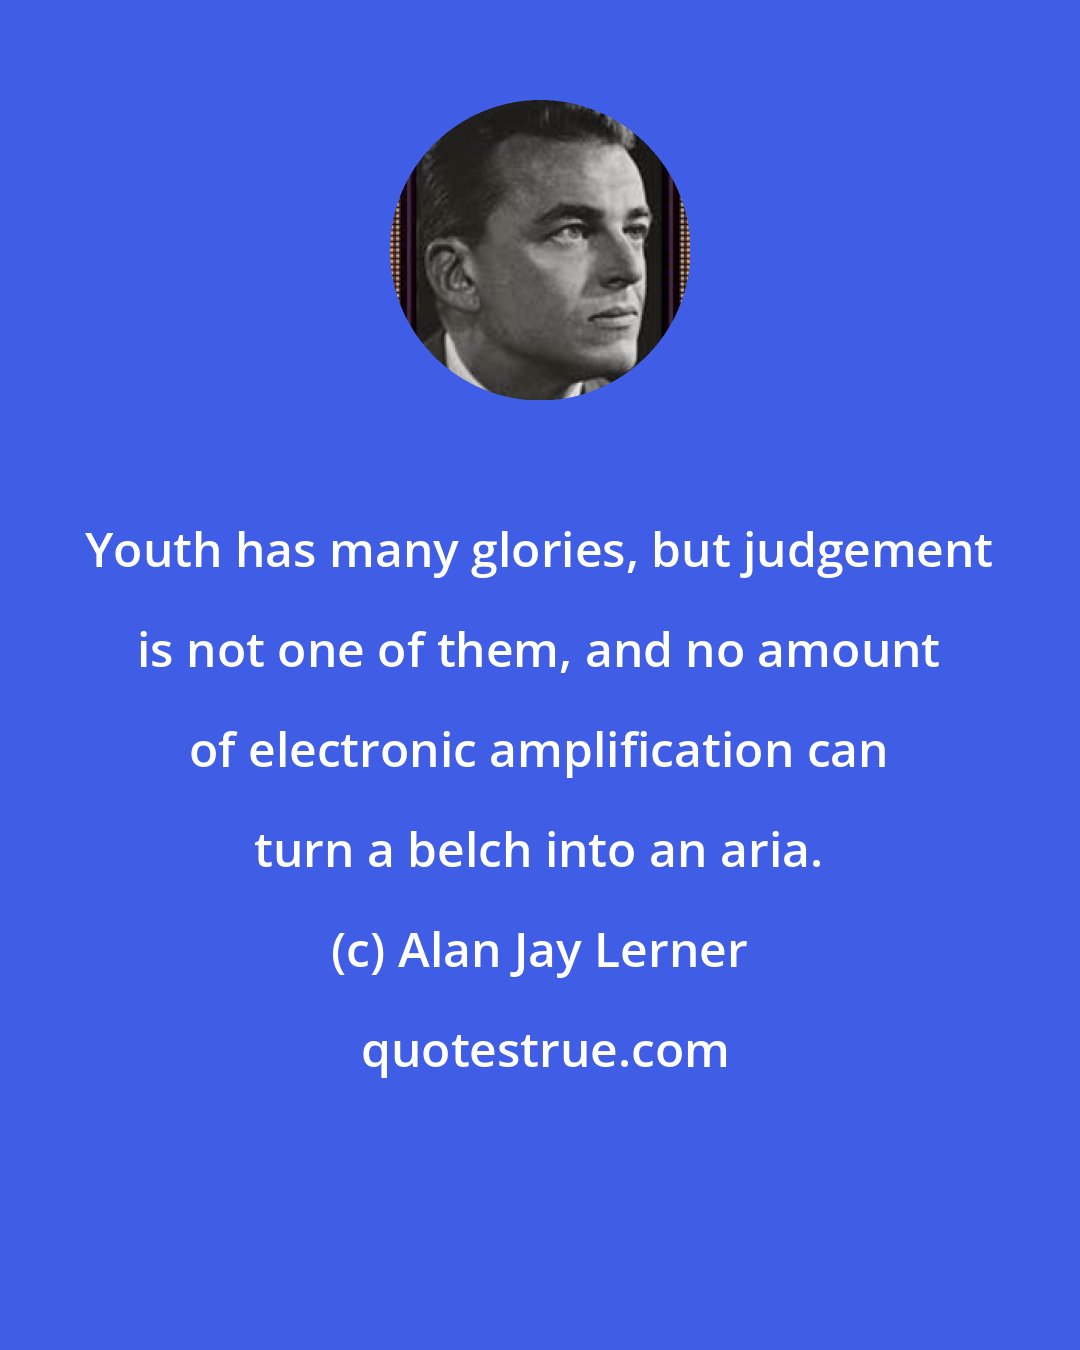 Alan Jay Lerner: Youth has many glories, but judgement is not one of them, and no amount of electronic amplification can turn a belch into an aria.